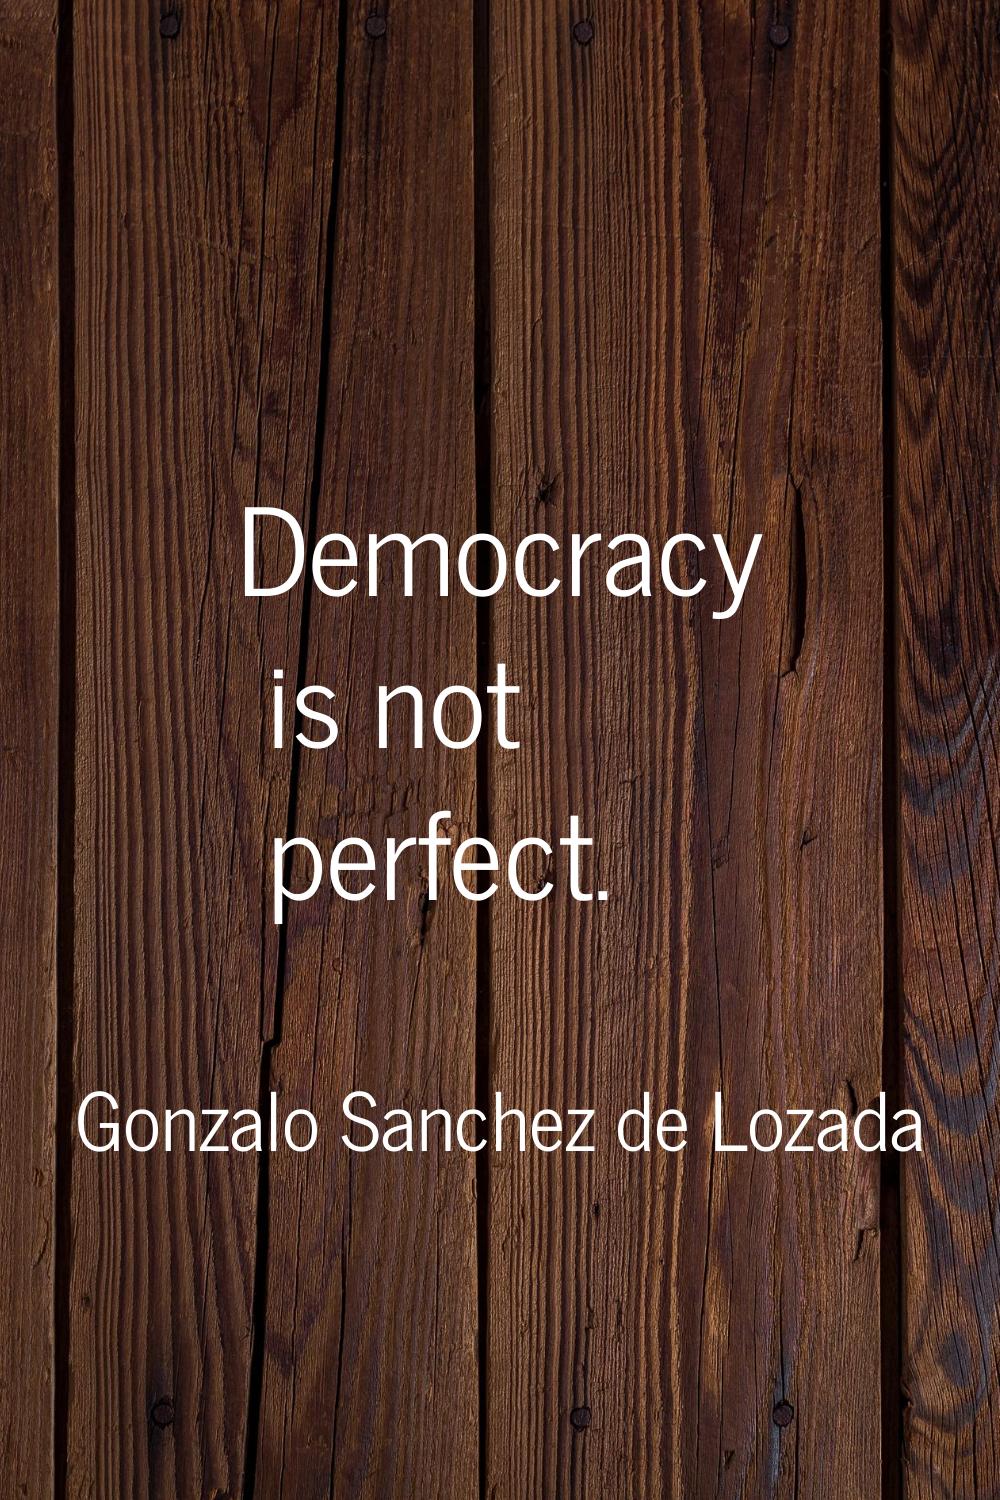 Democracy is not perfect.